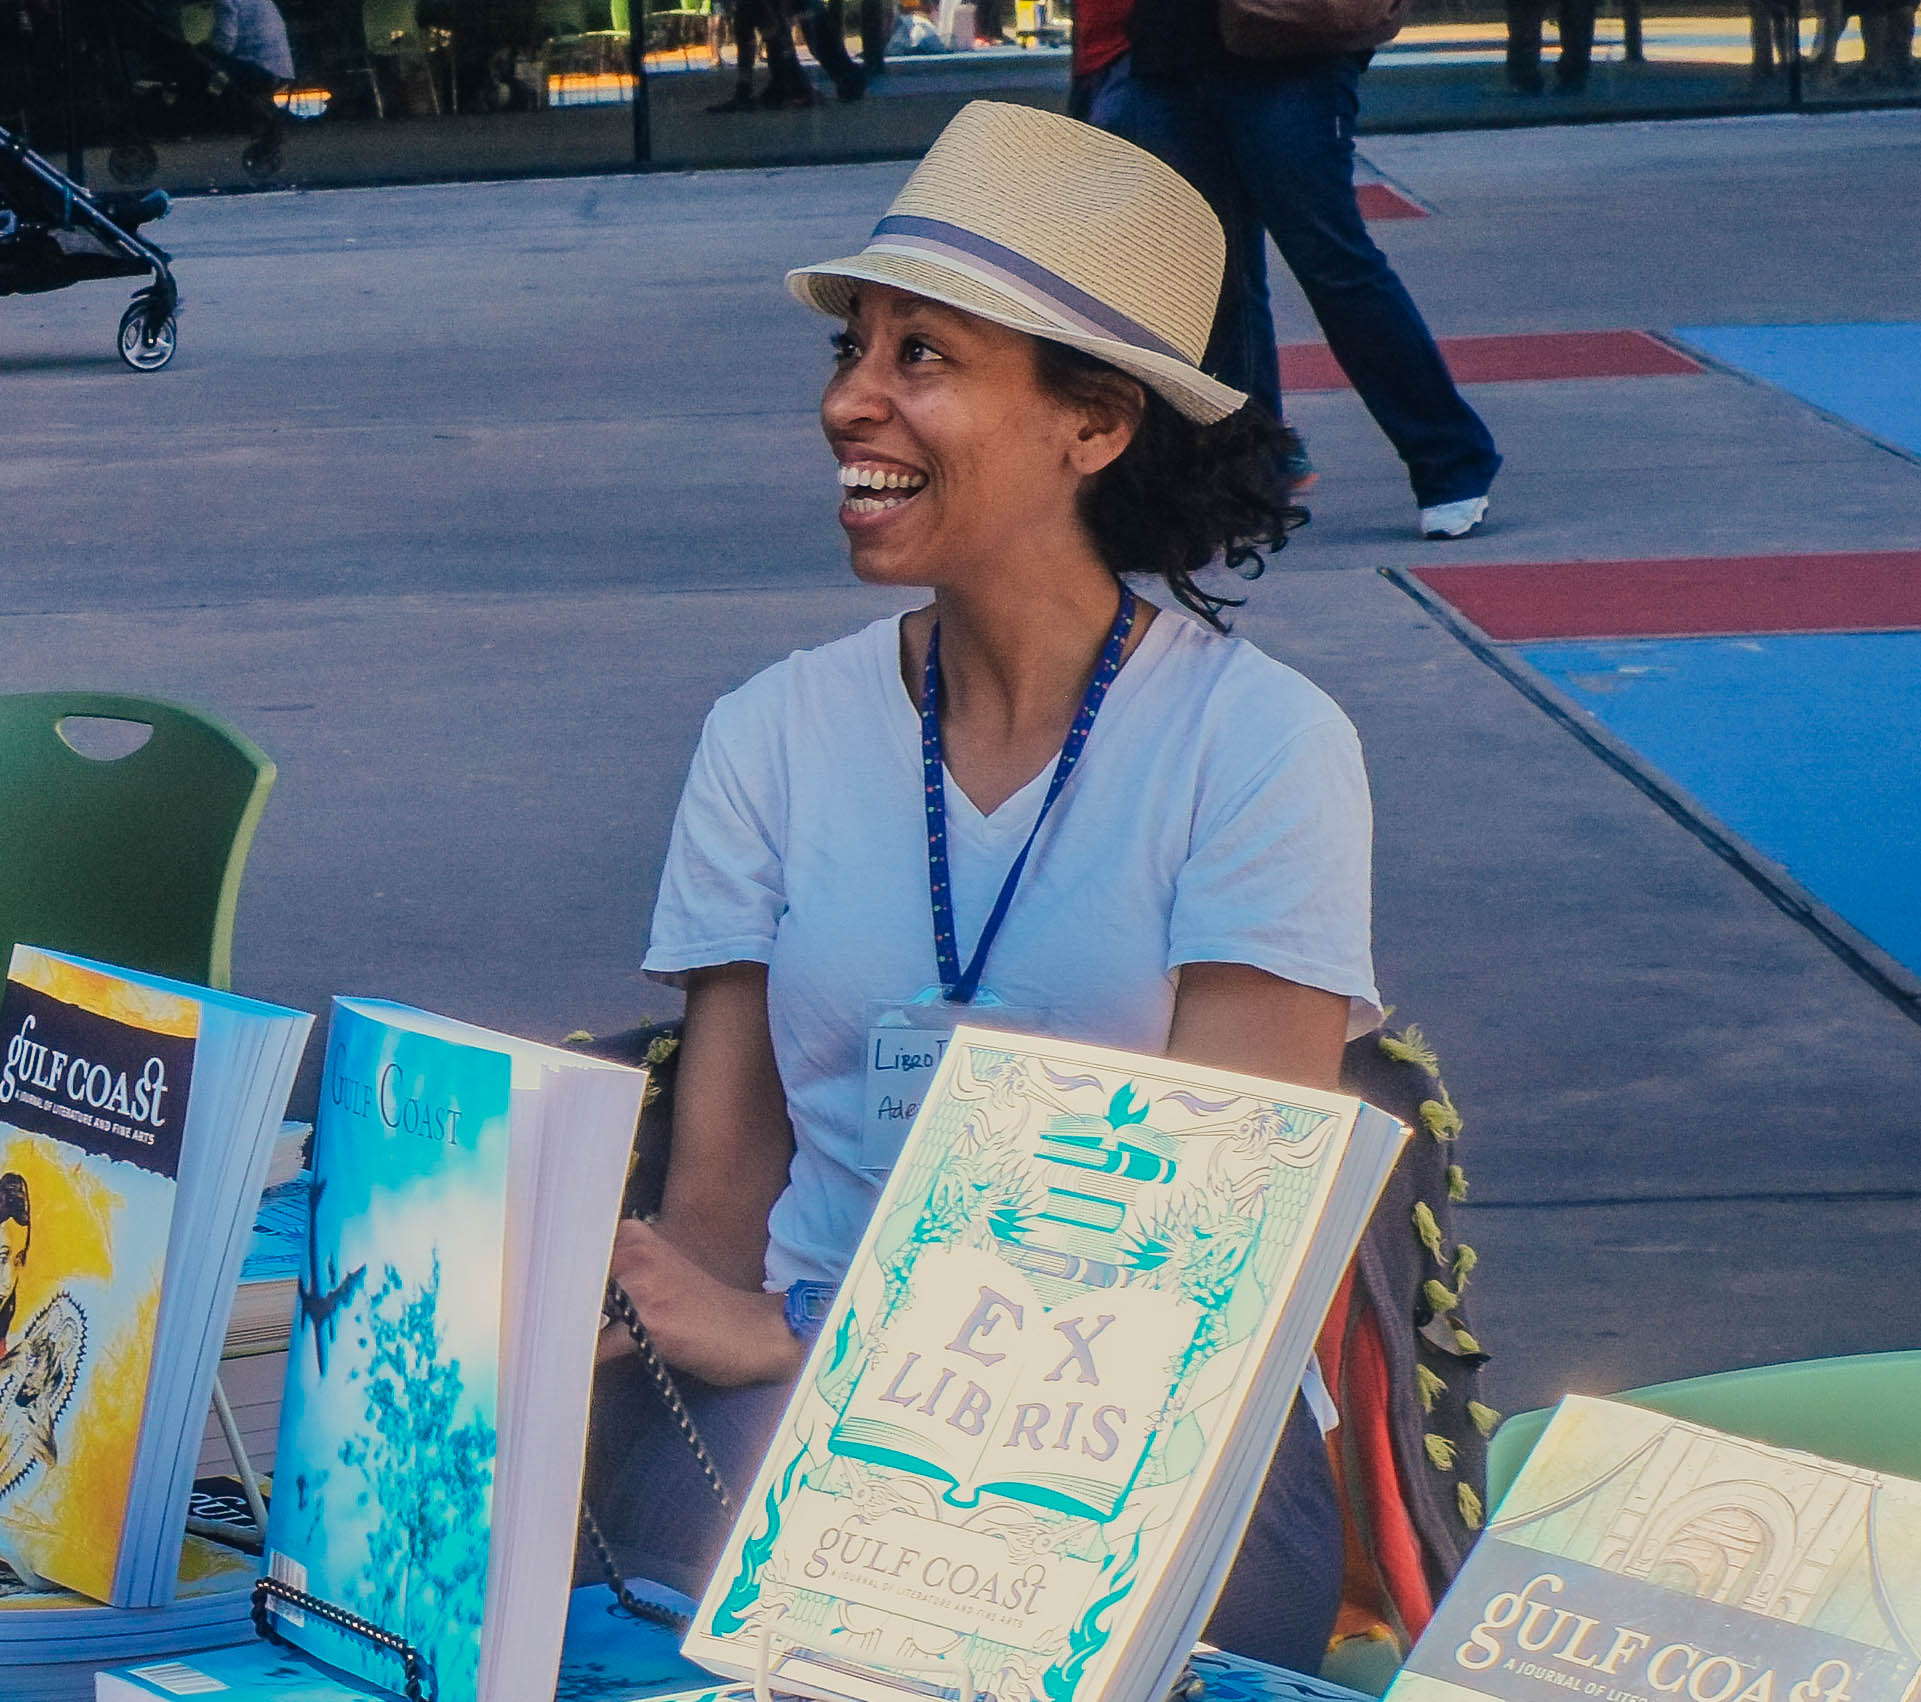 Gulf Coast Journal Editor in Chief at LibroFest 2015